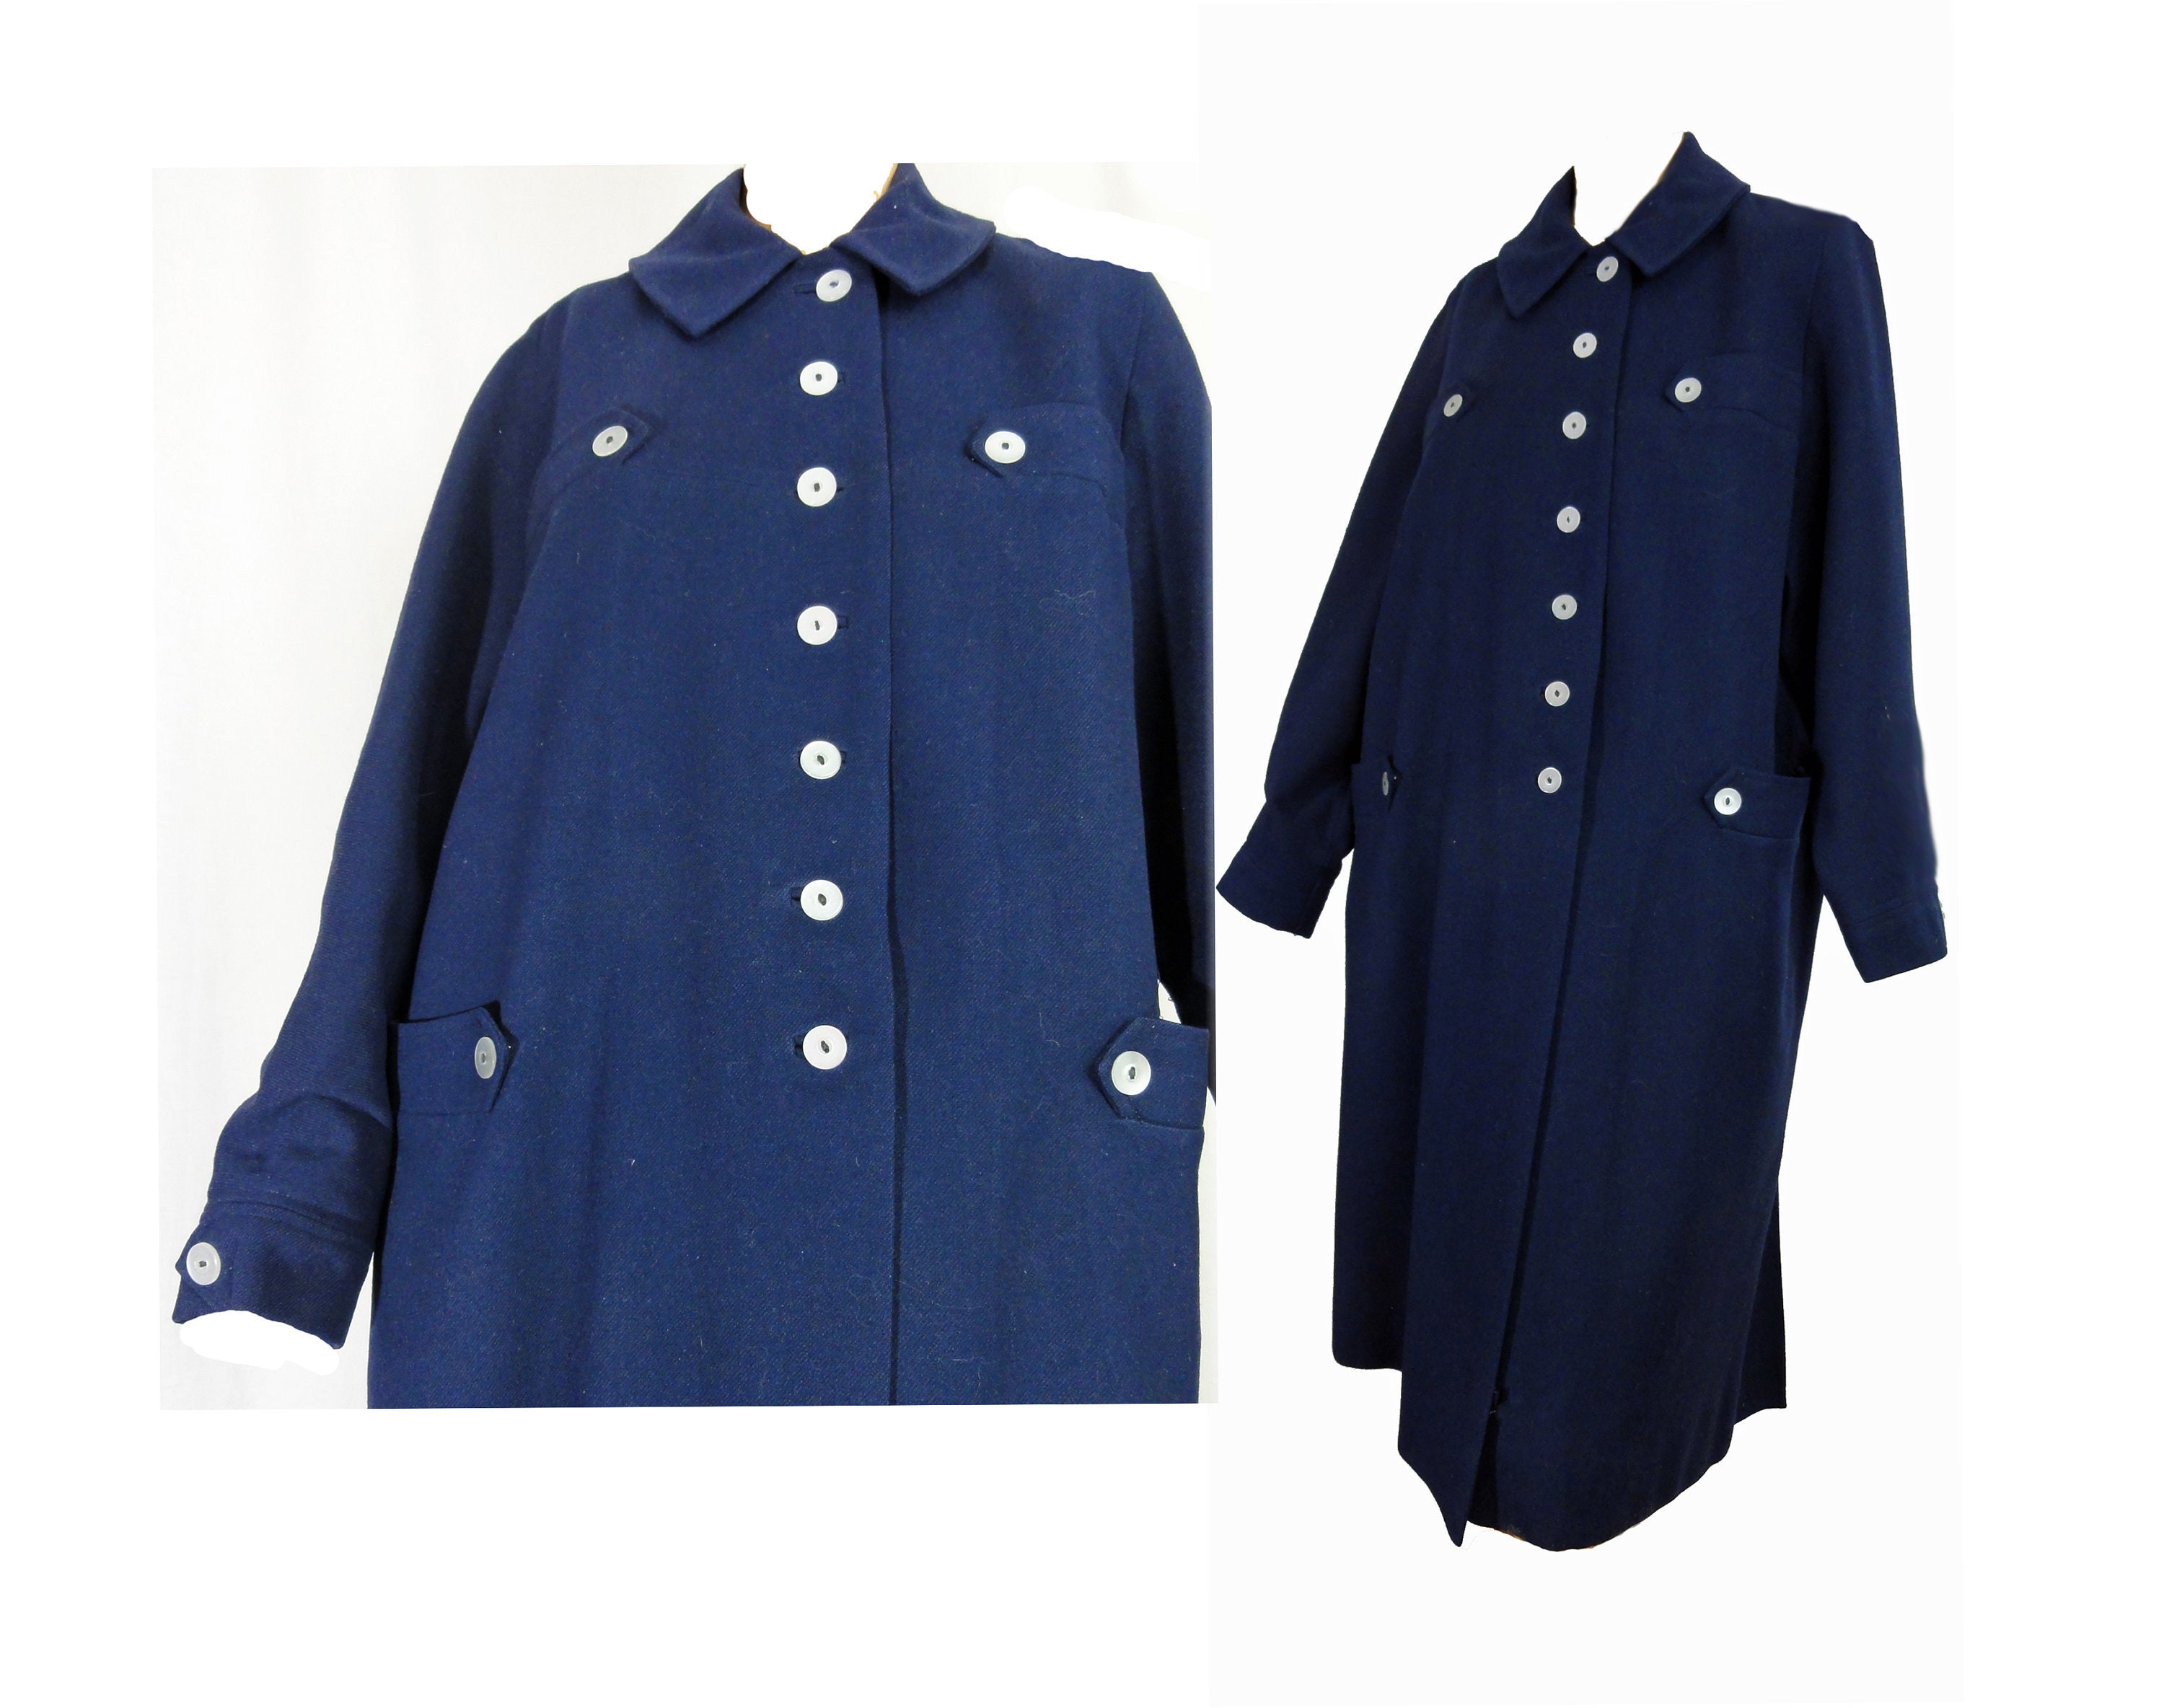 Dark blue lightweight coat with white buttons